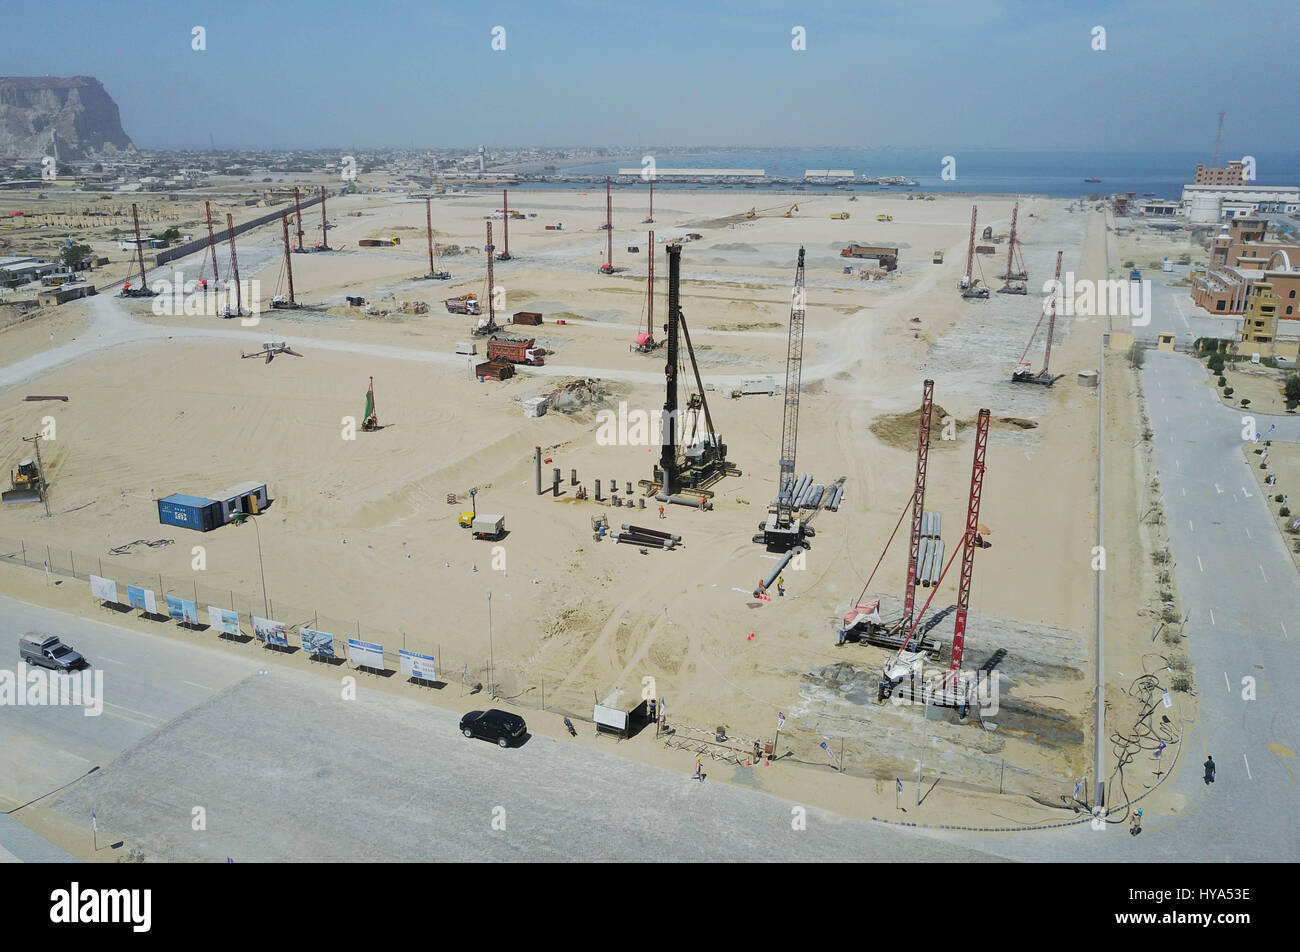 (170403) -- GWADAR(PAKISTAN), April 3, 2017 (Xinhua) -- Photo taken on March 23, 2017 shows a free zone in construction of the Gwadar port in Gwadar, Pakistan. Gwadar, a poorly-known port town previously in Pakistan has been becoming a new economic engine for the country with the construction of a free zone co-built with China. (Xinhua/Liu Tian) (sxk) Stock Photo